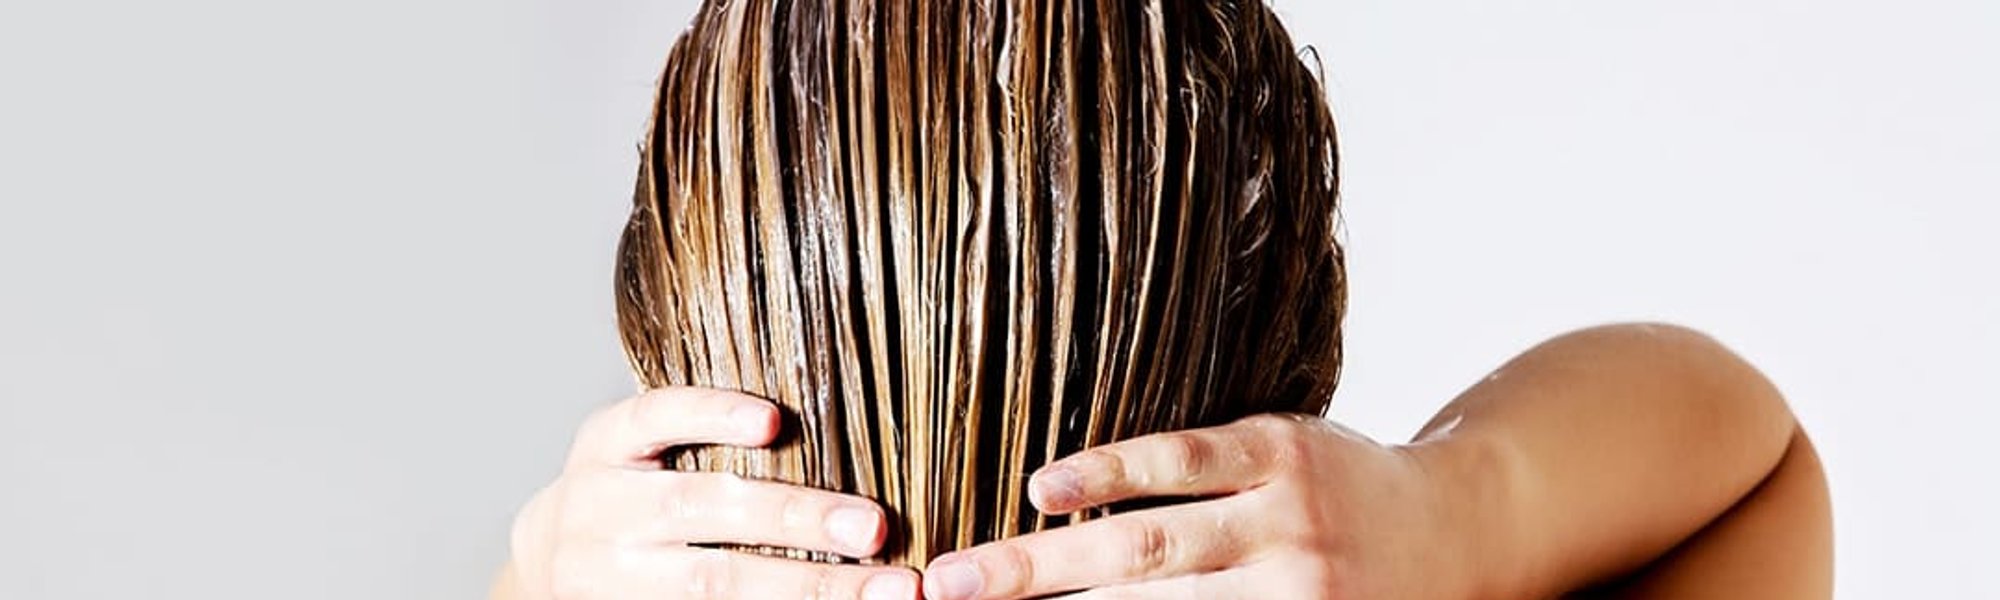 How To Revive Summer Damaged Hair 1080x476